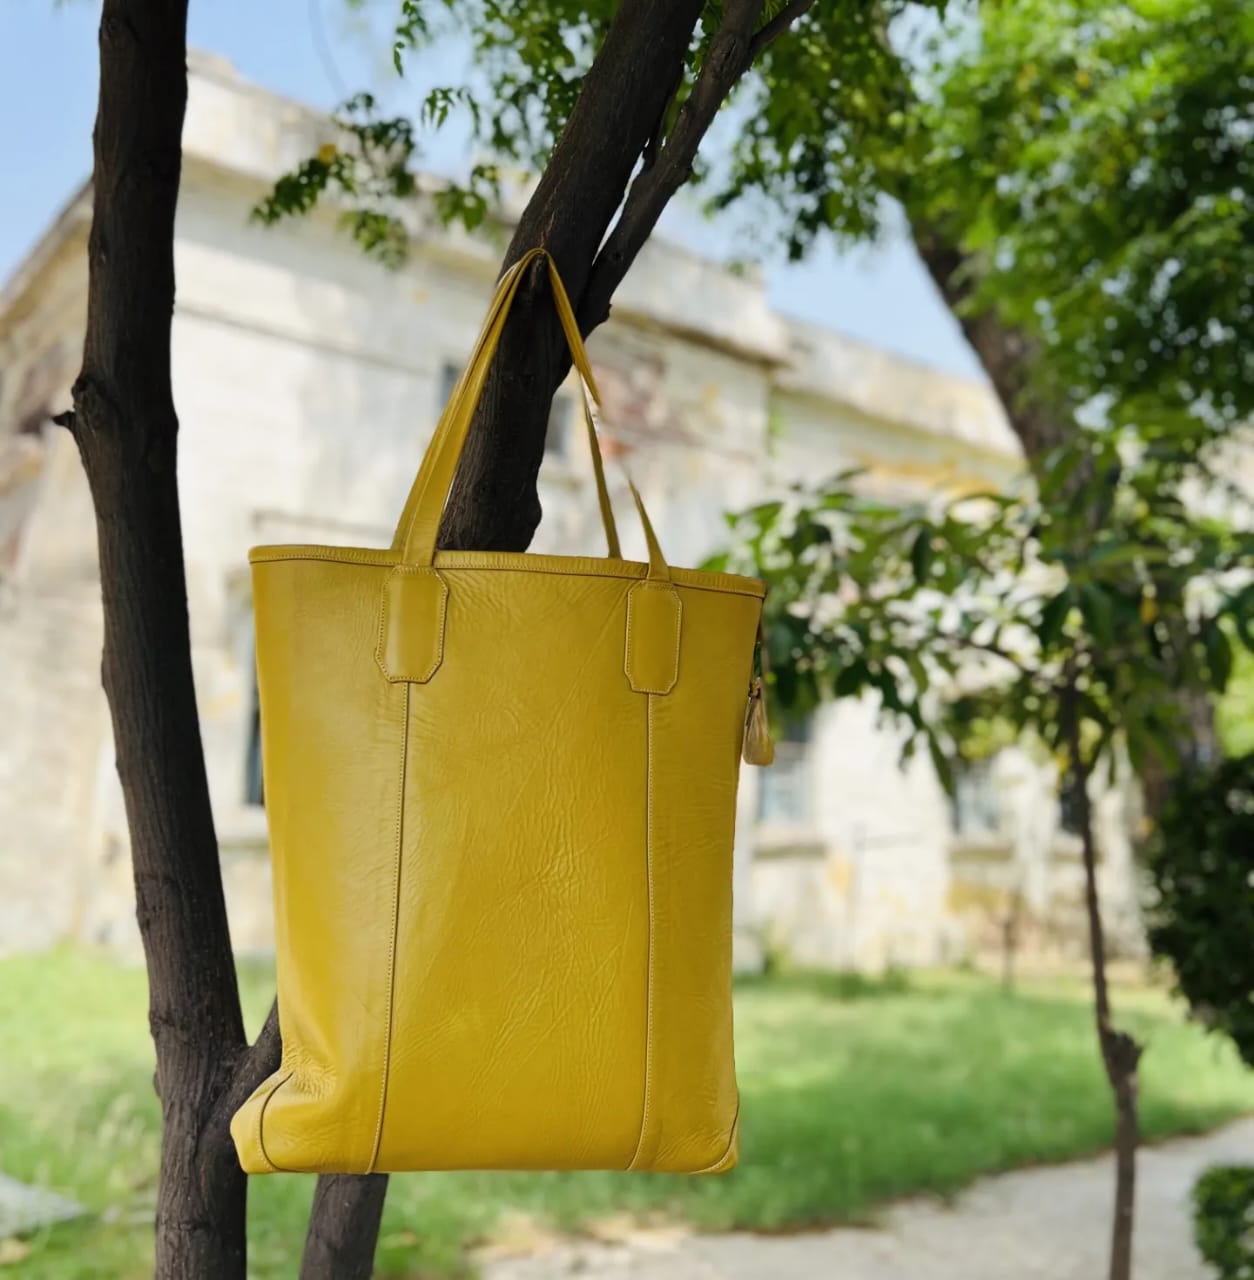 Yellow Tote Bag - Handcrafted - Leatherist.official